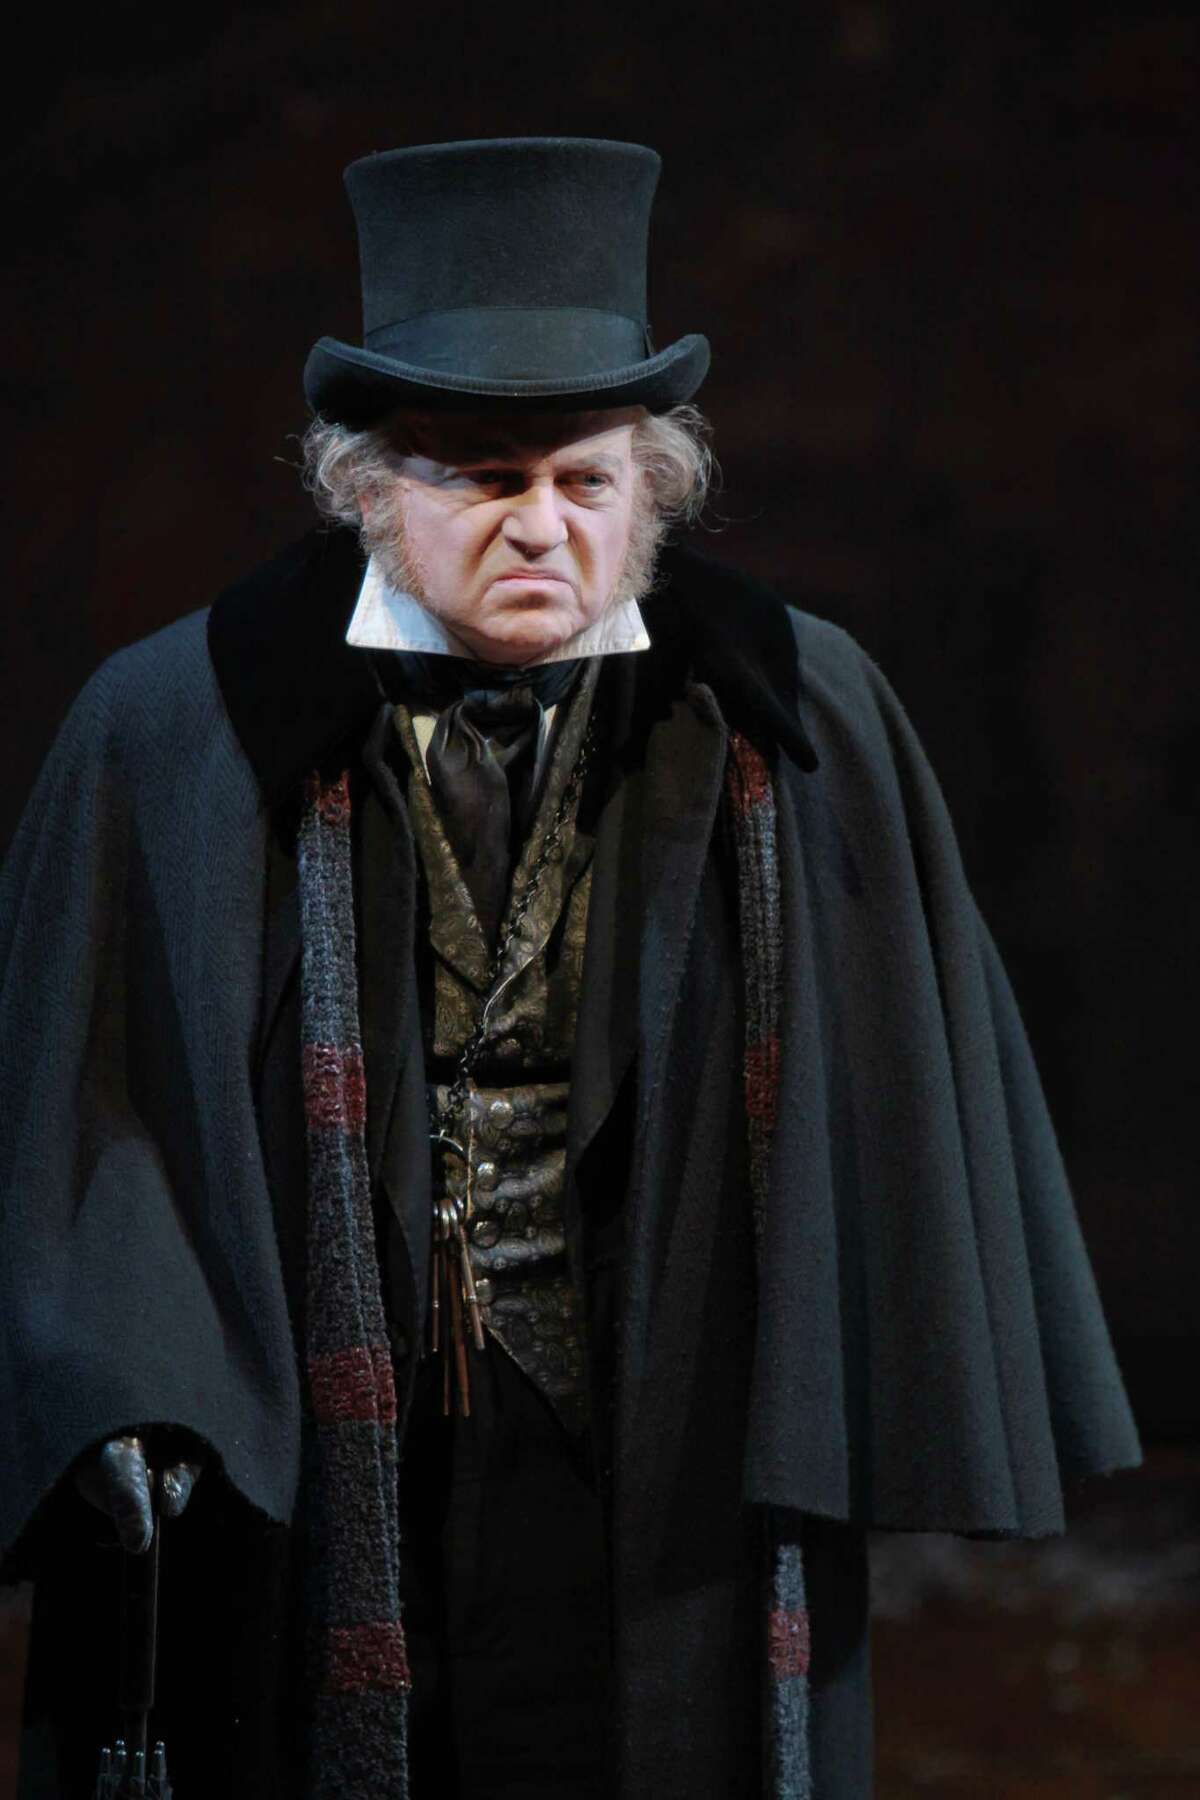 (For the Chronicle/Gary Fountain, November 13, 2013) Jeffery Bean as Ebenezer Scrooge, in this scene from Alley Theatre's production of "A Christmas Carol."